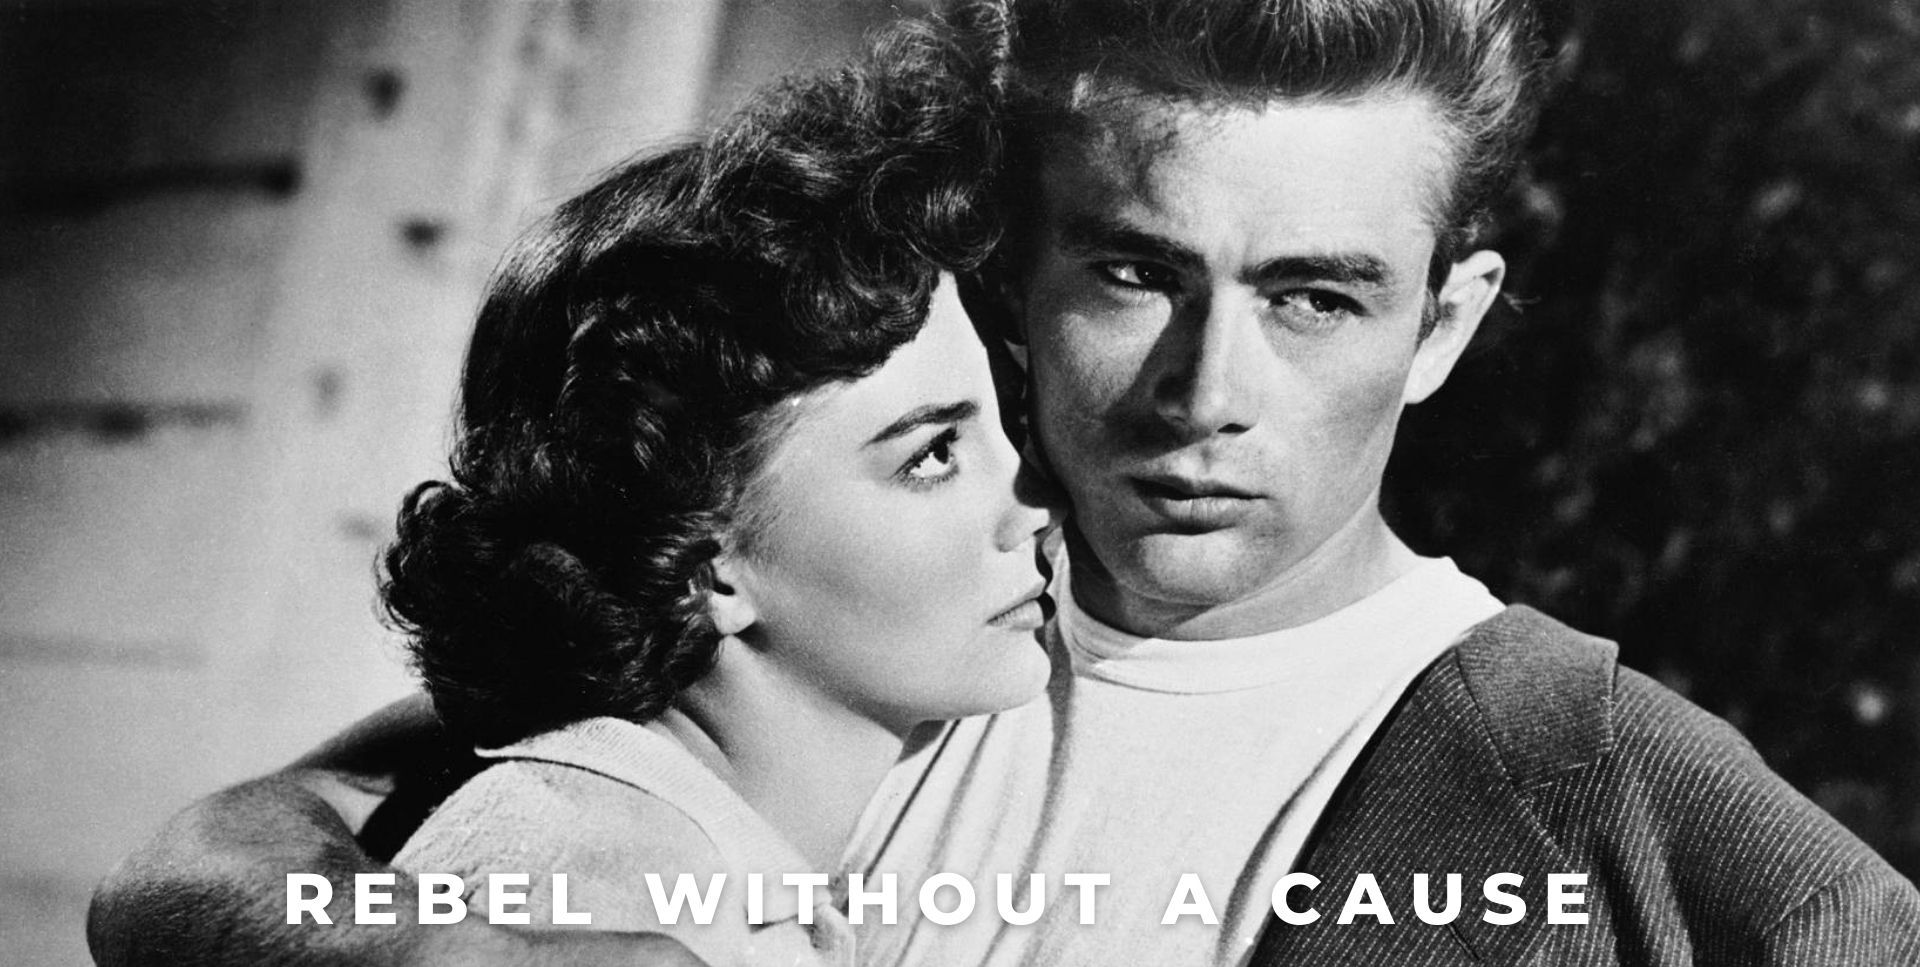 36 Facts about the movie Rebel Without a Cause - Facts.net